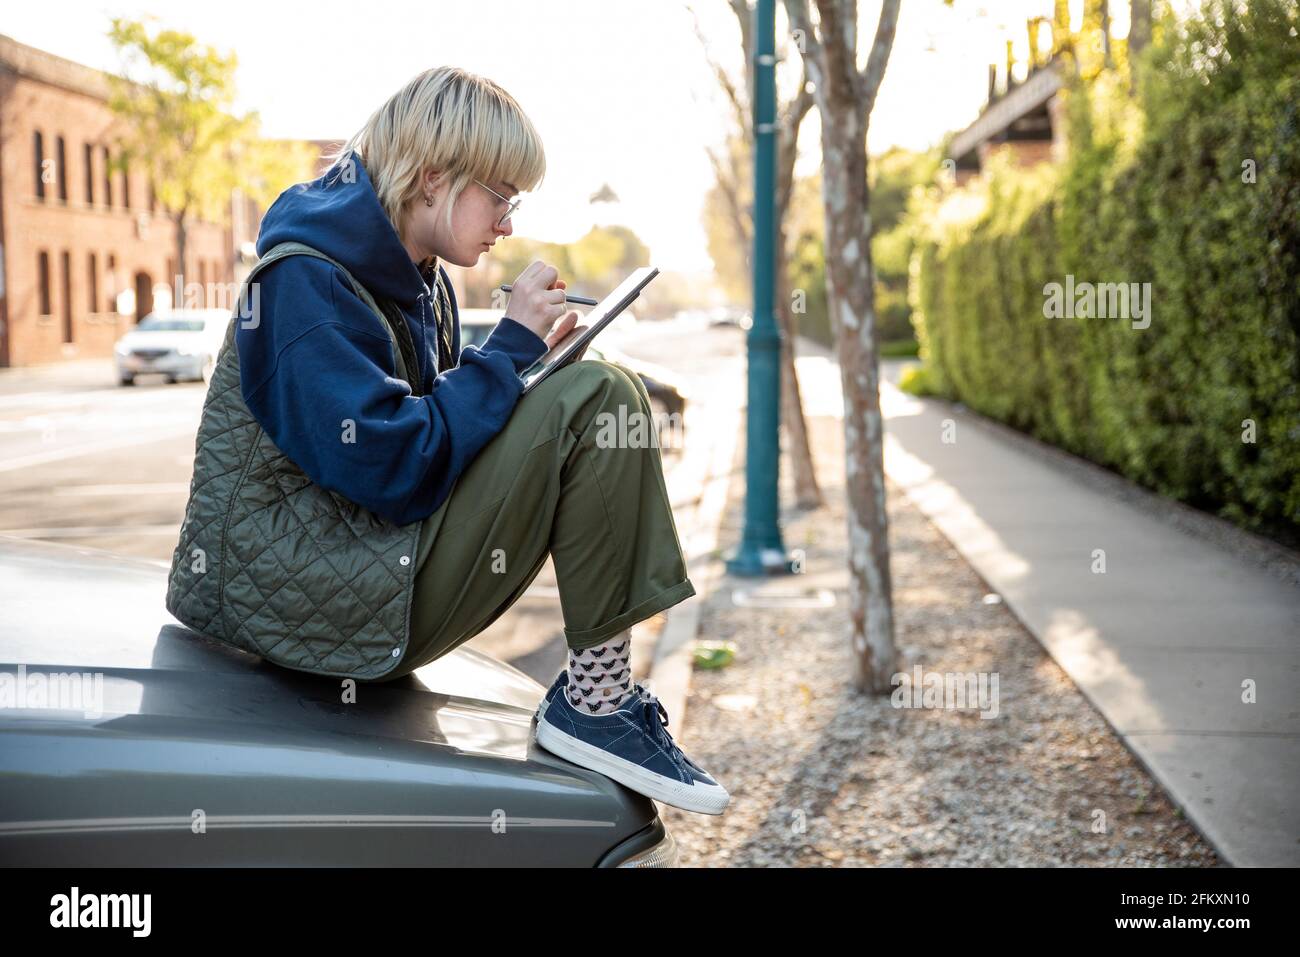 Young adult sitting on hood of truck using stylus and tablet to work Stock Photo